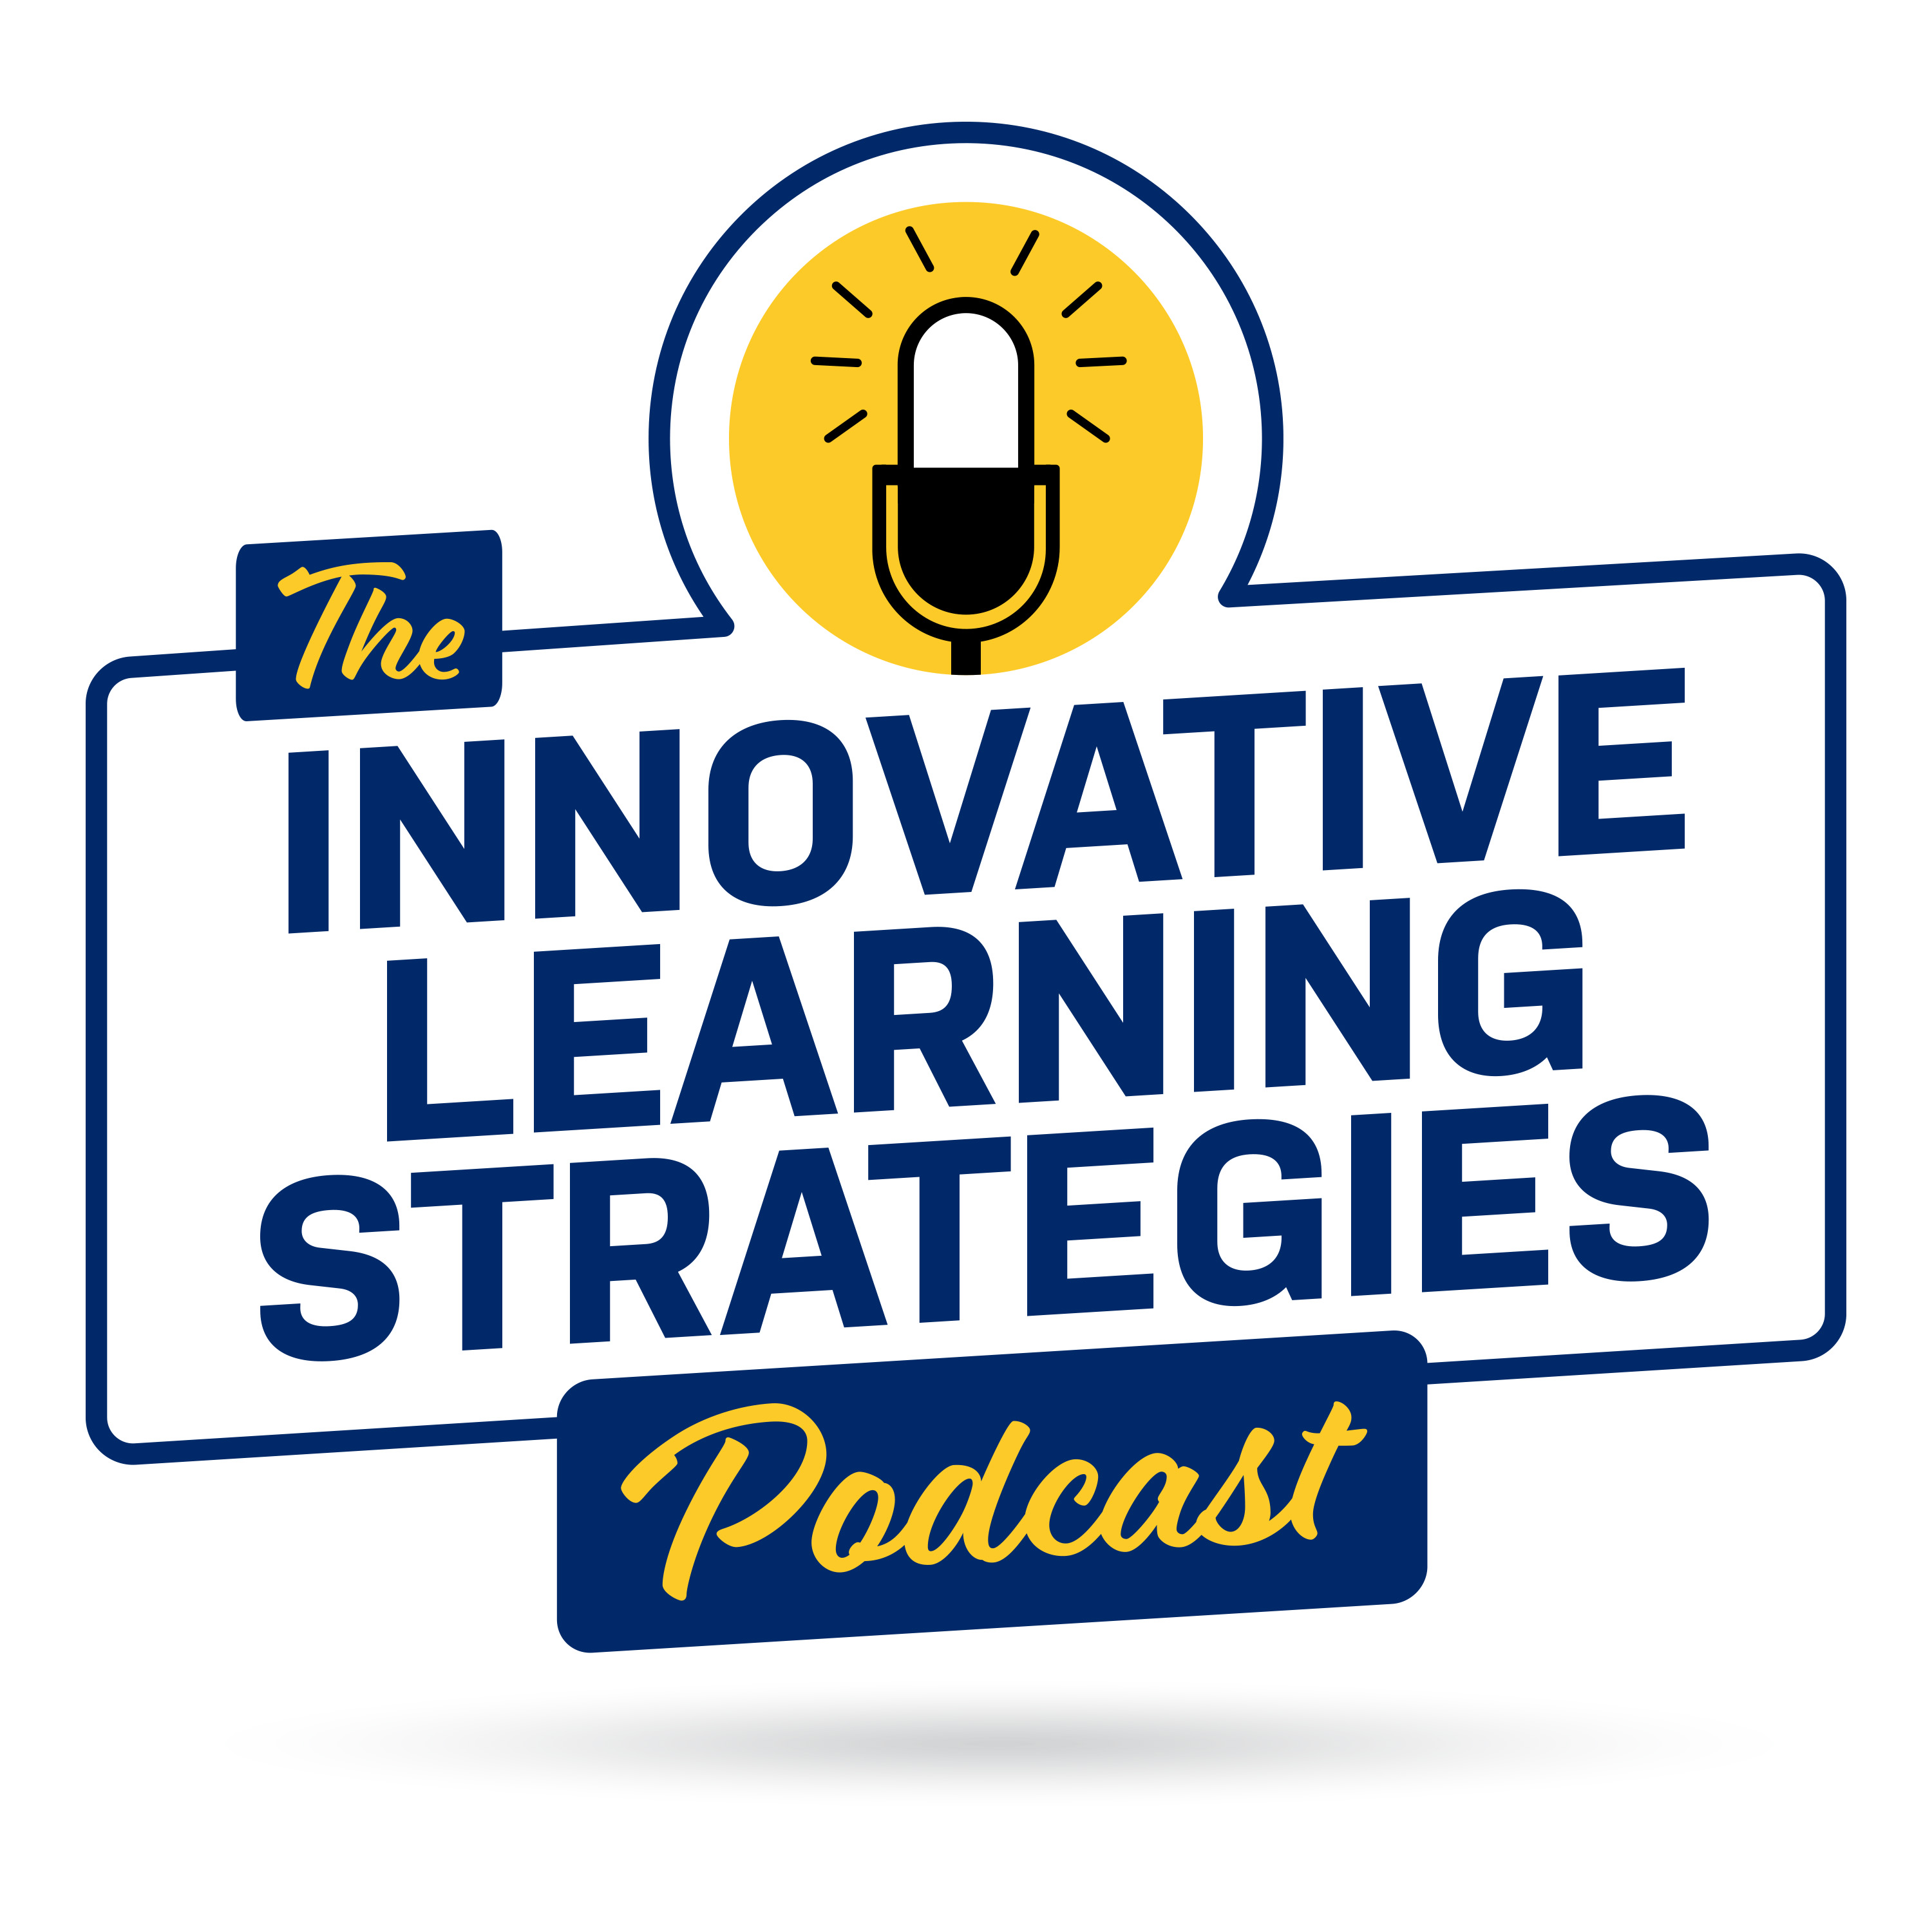 The Innovative Learning Strategies Podcast